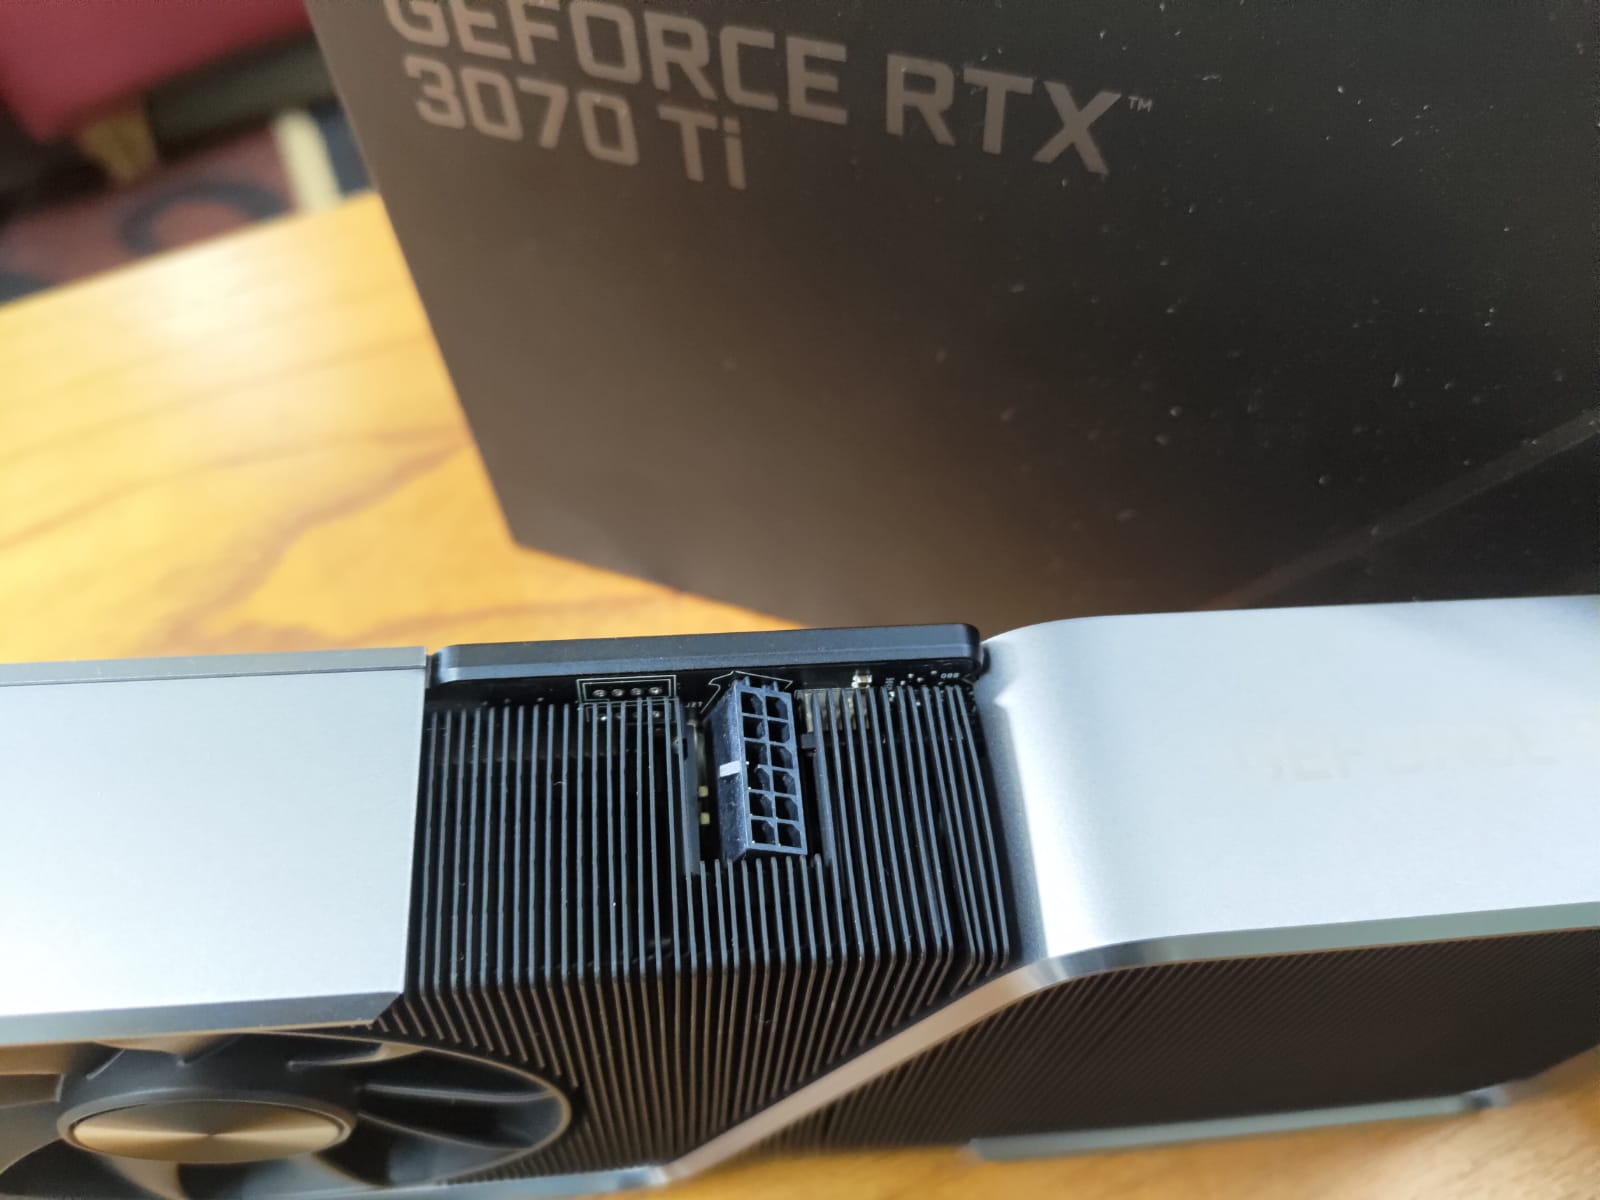 Review Nvidia GeForce RTX 3070 Ti Reference Edition